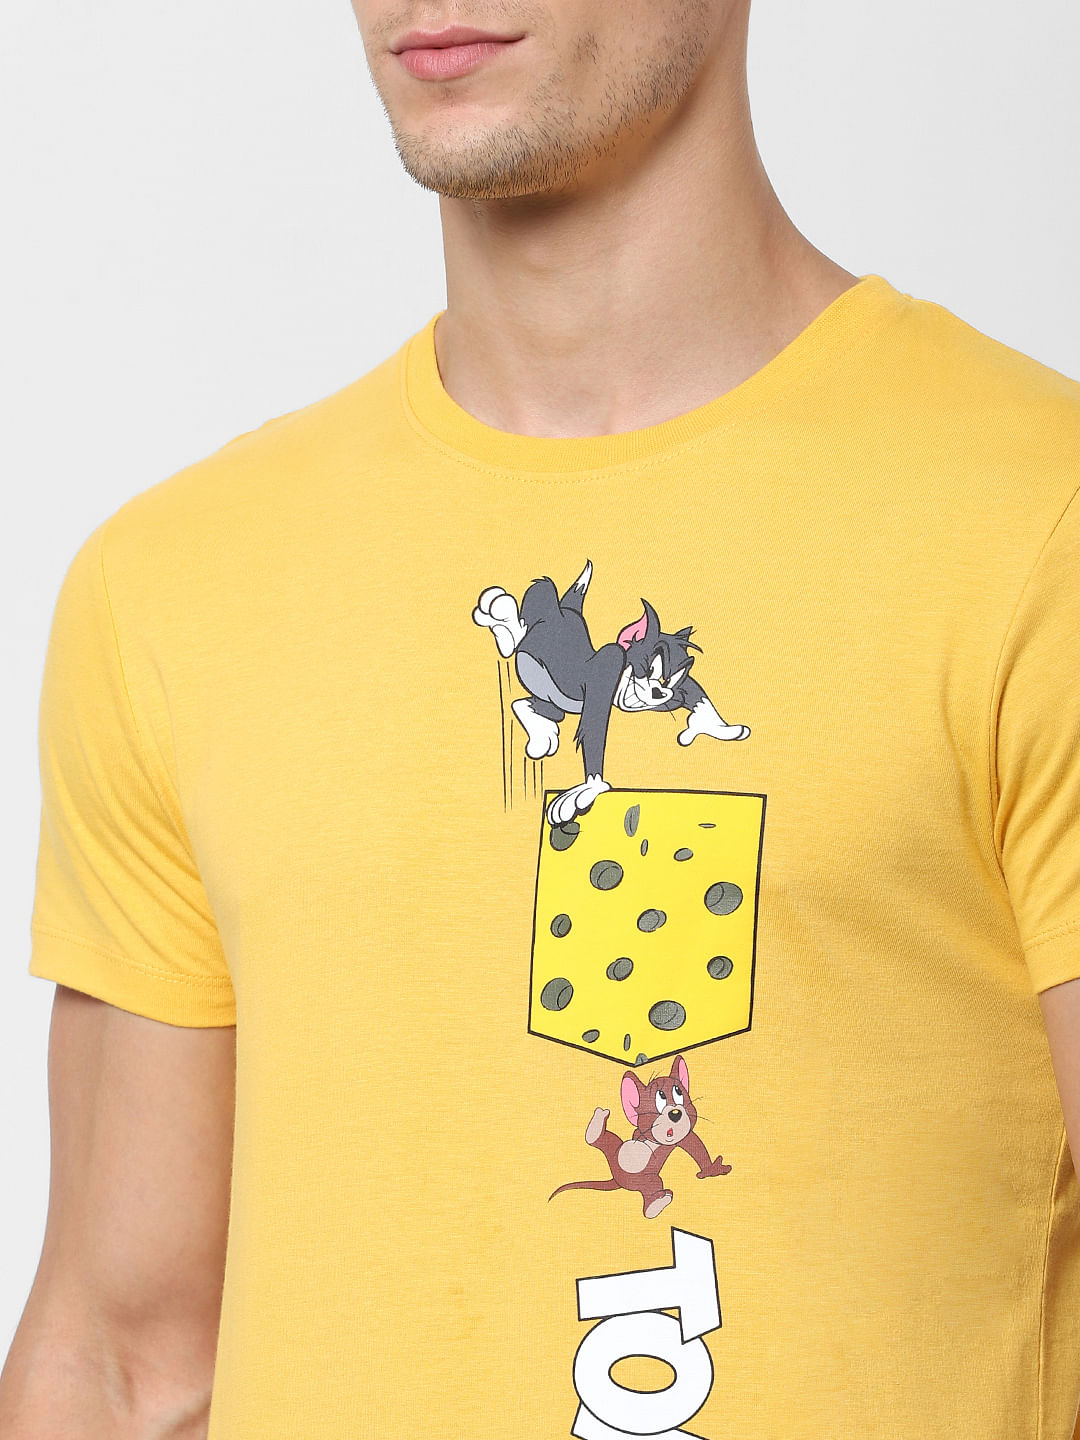 tom and jerry t shirt